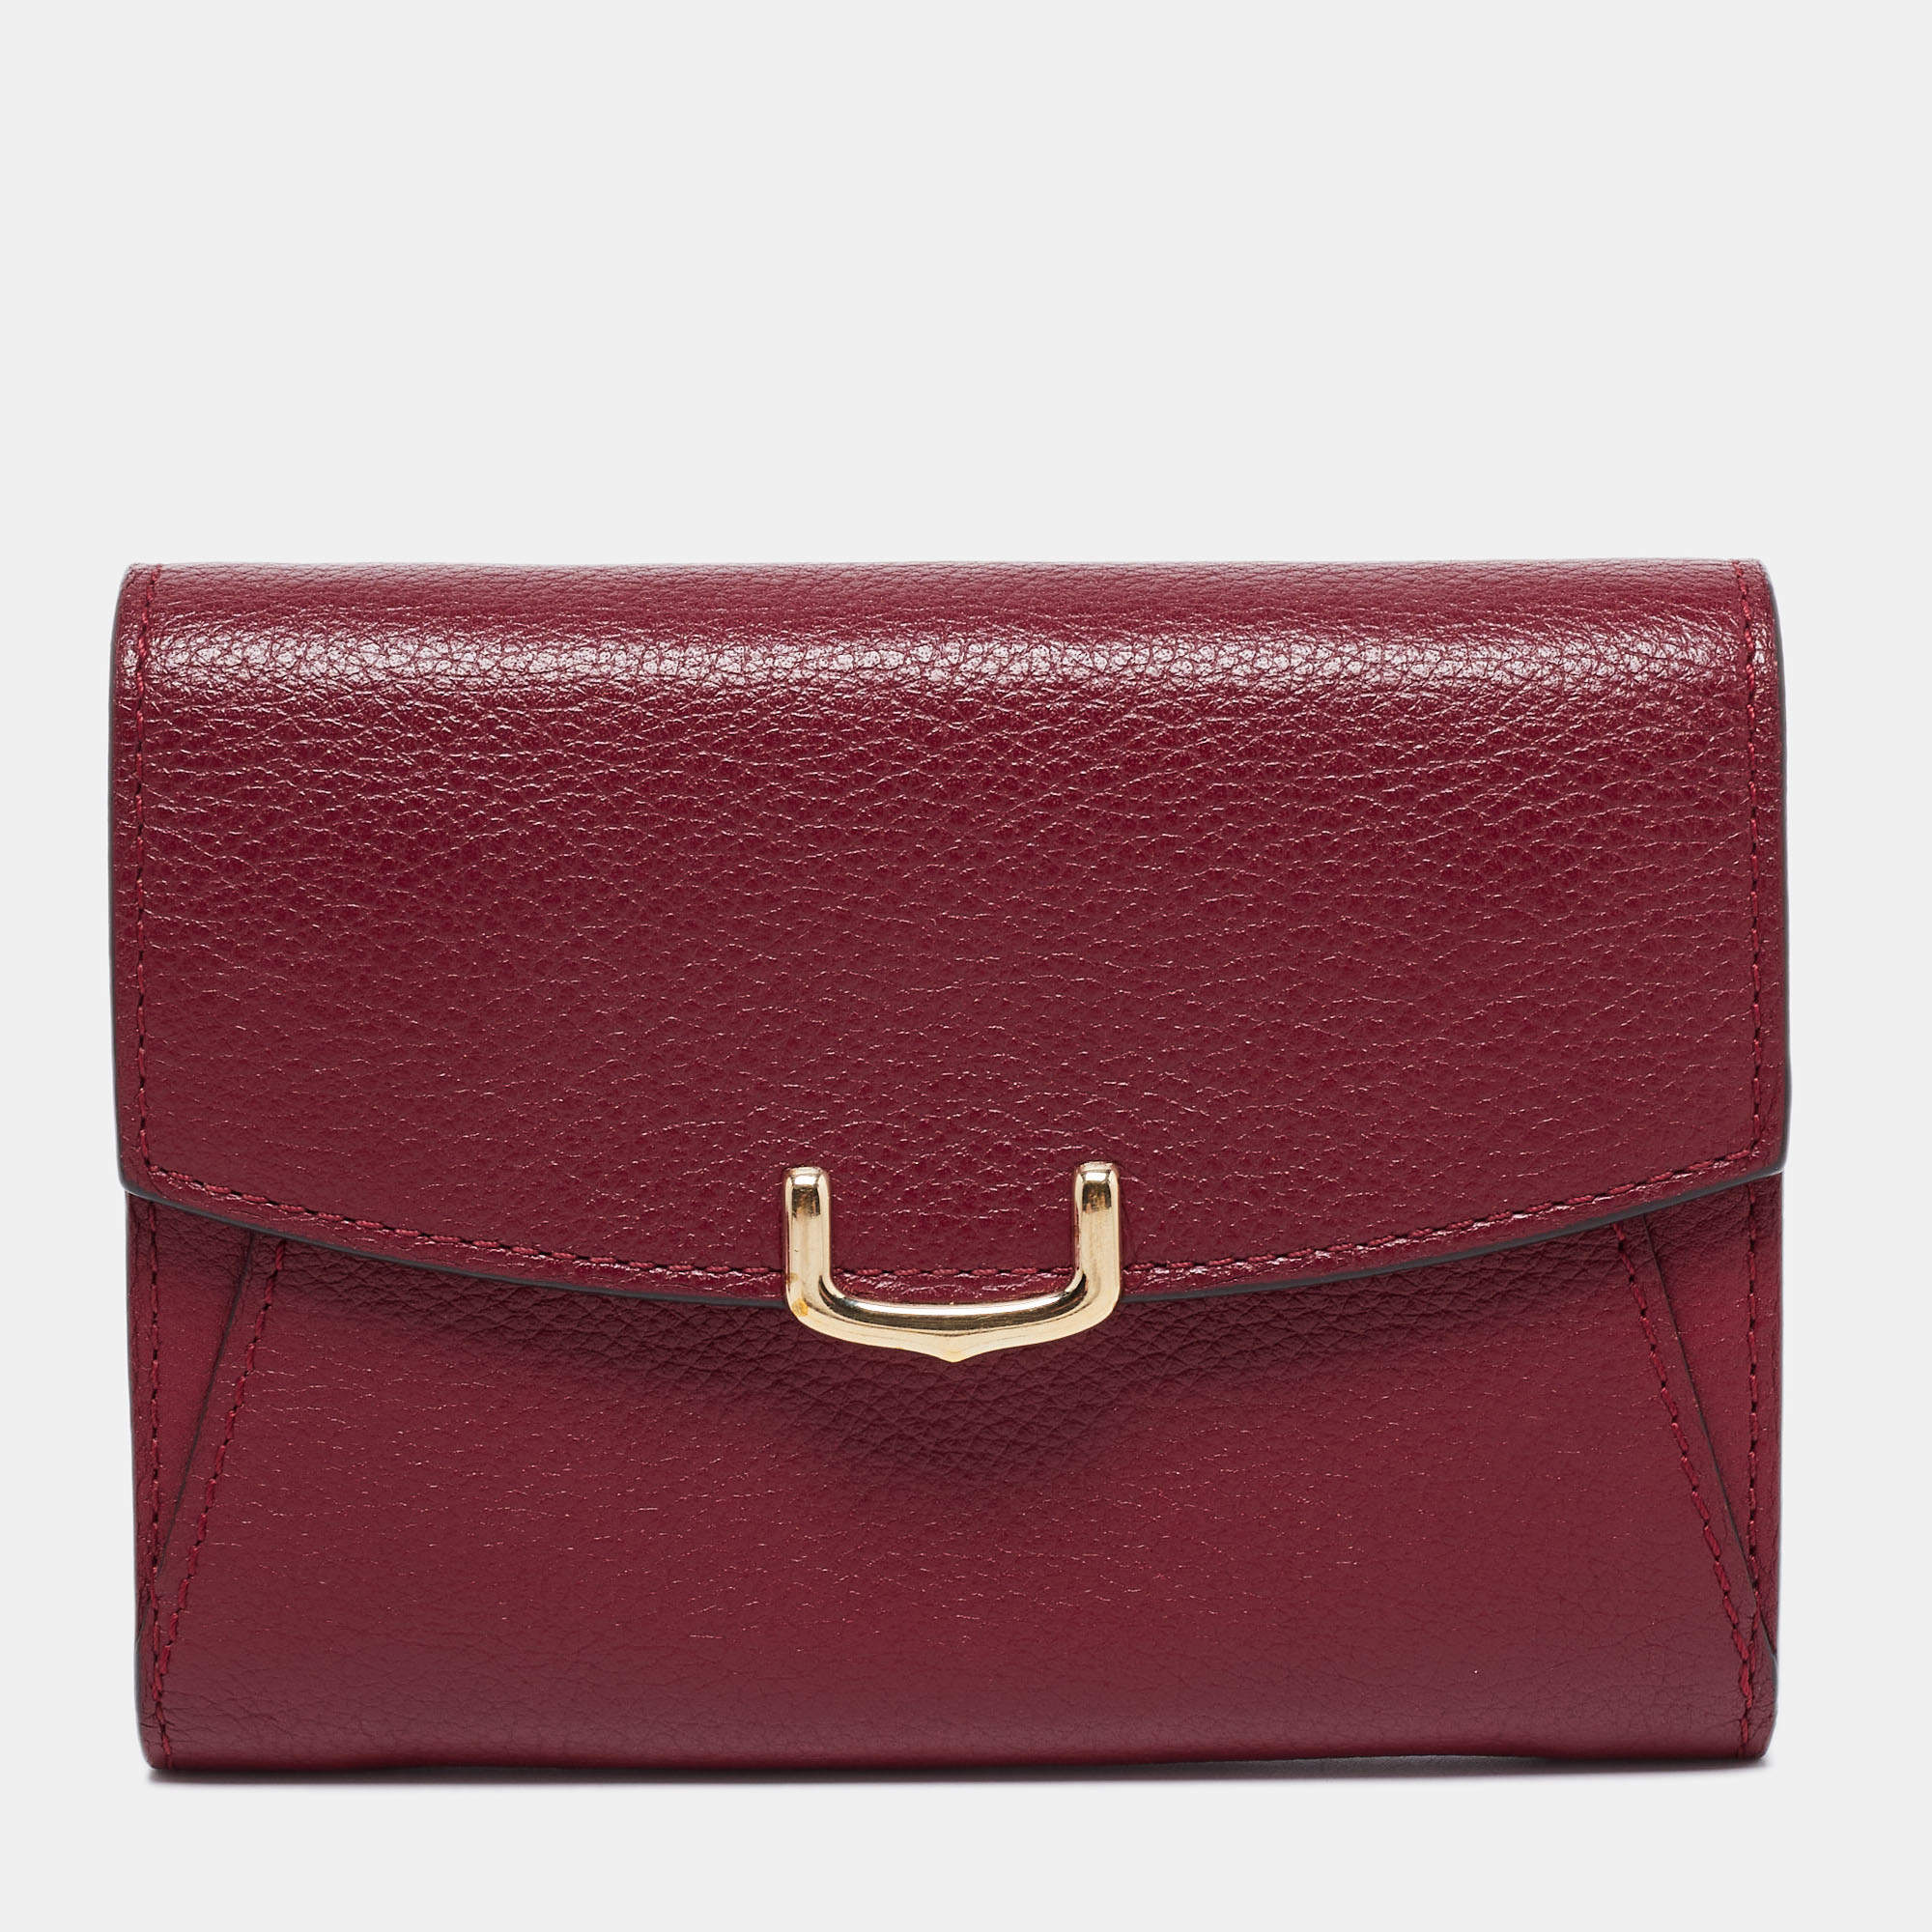 Cartier Red Leather Small C de Cartier Compact Wallet 